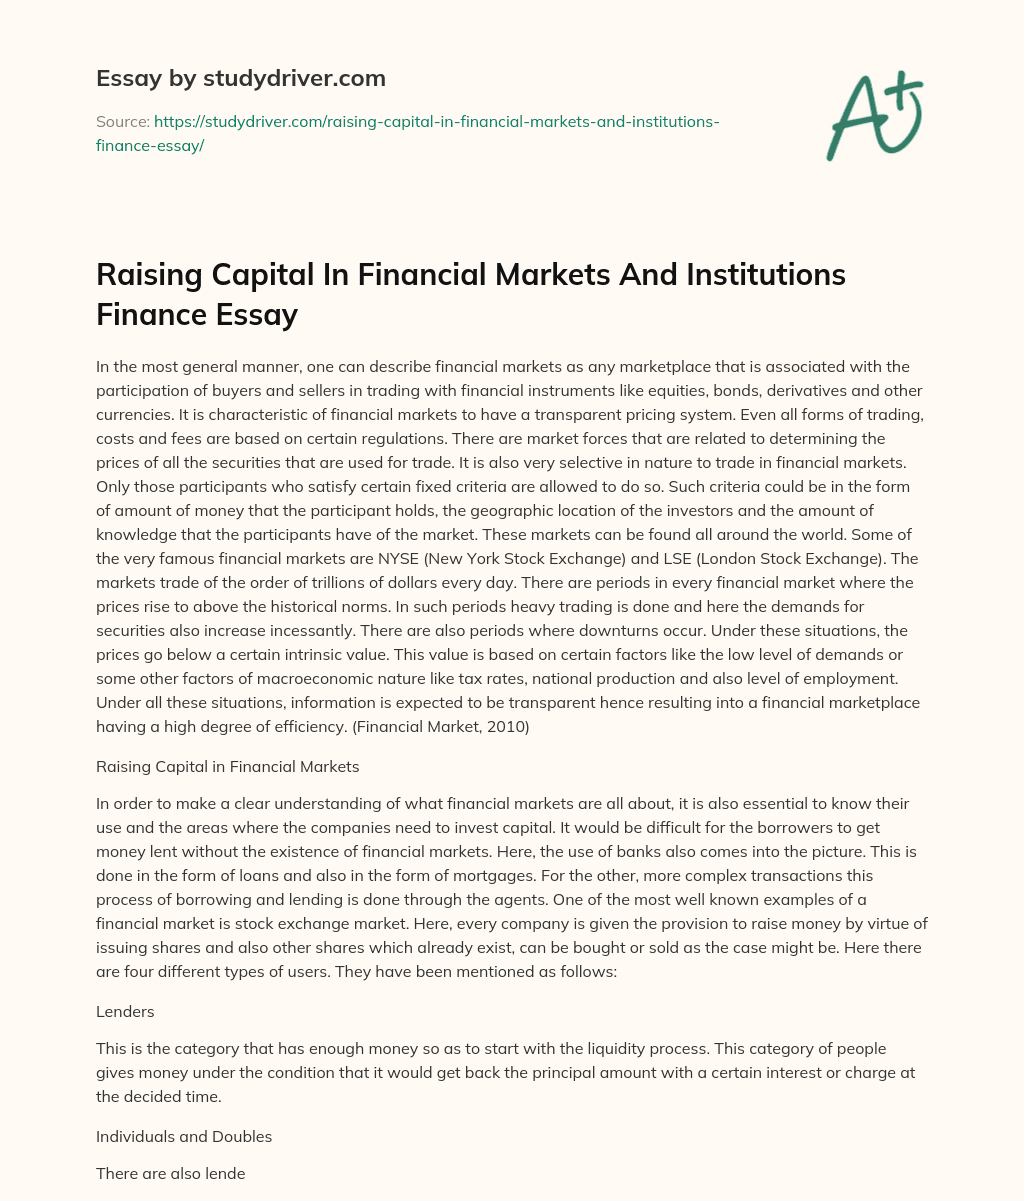 Raising Capital in Financial Markets and Institutions Finance Essay essay